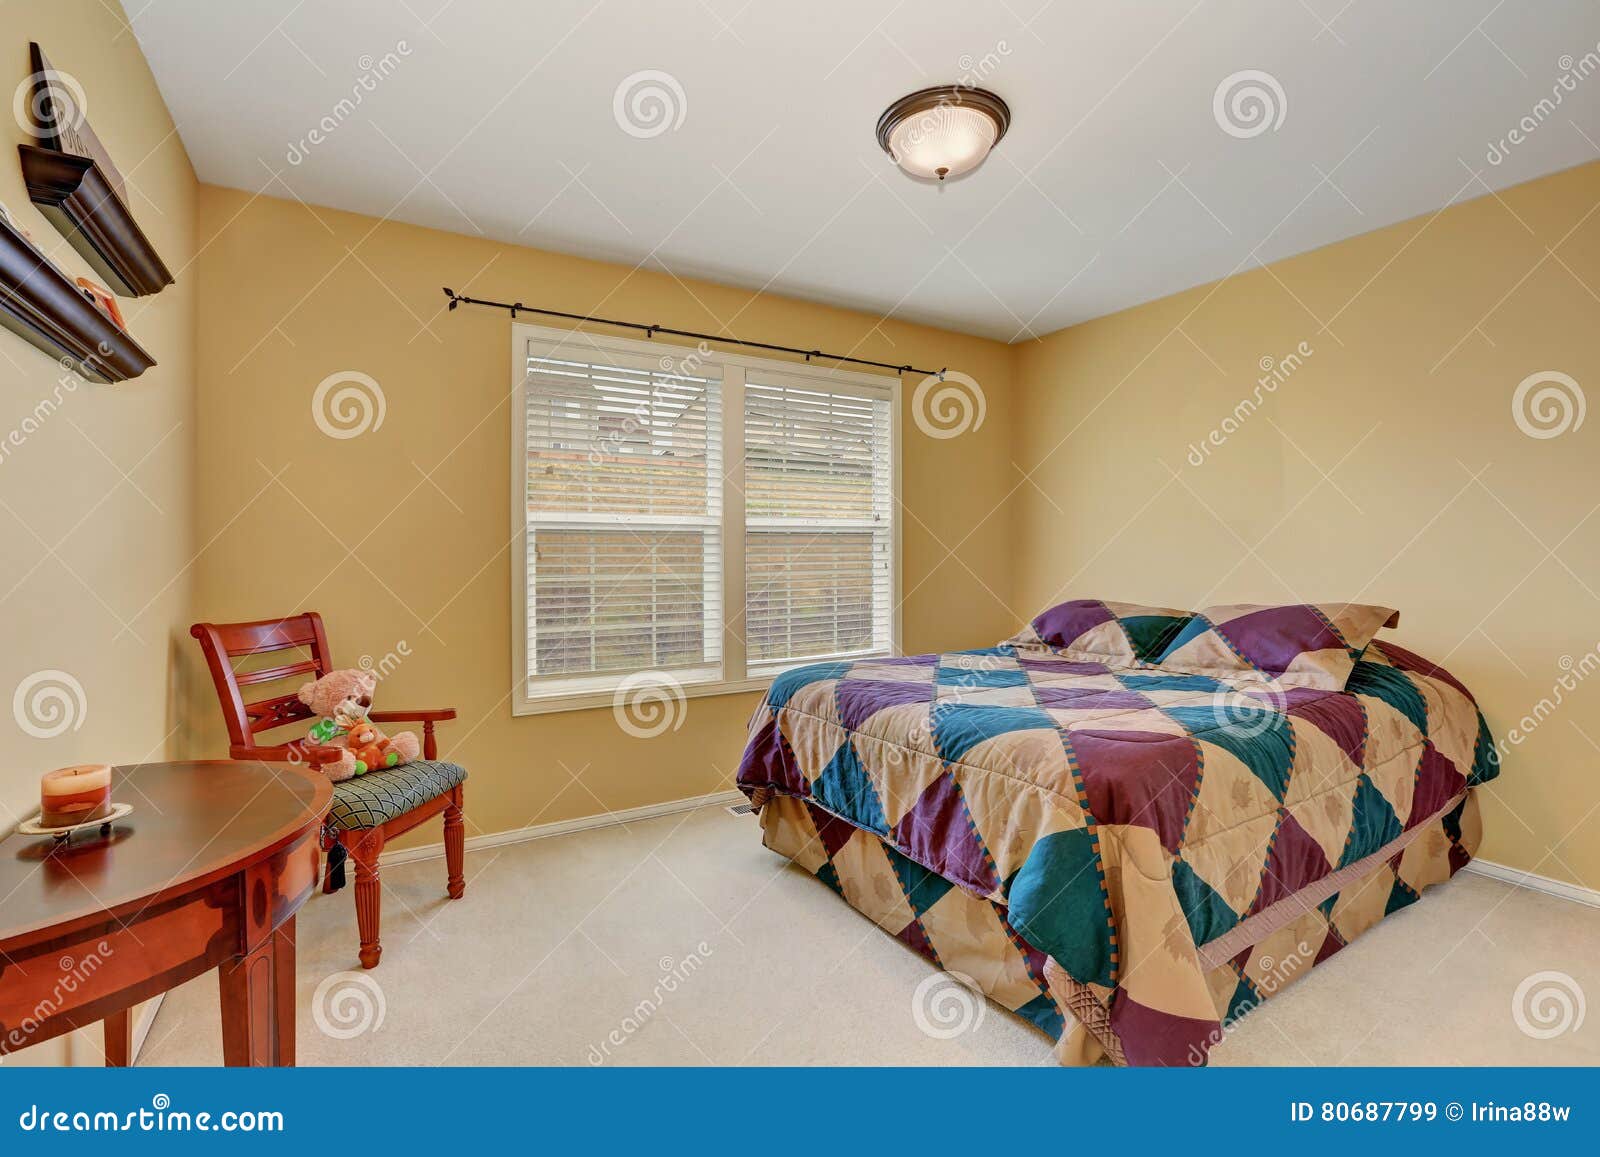 Kids Bedroom with Colorful Bed and Pastel Yellow Walls. Stock Image - Image  of design, pillow: 80687799